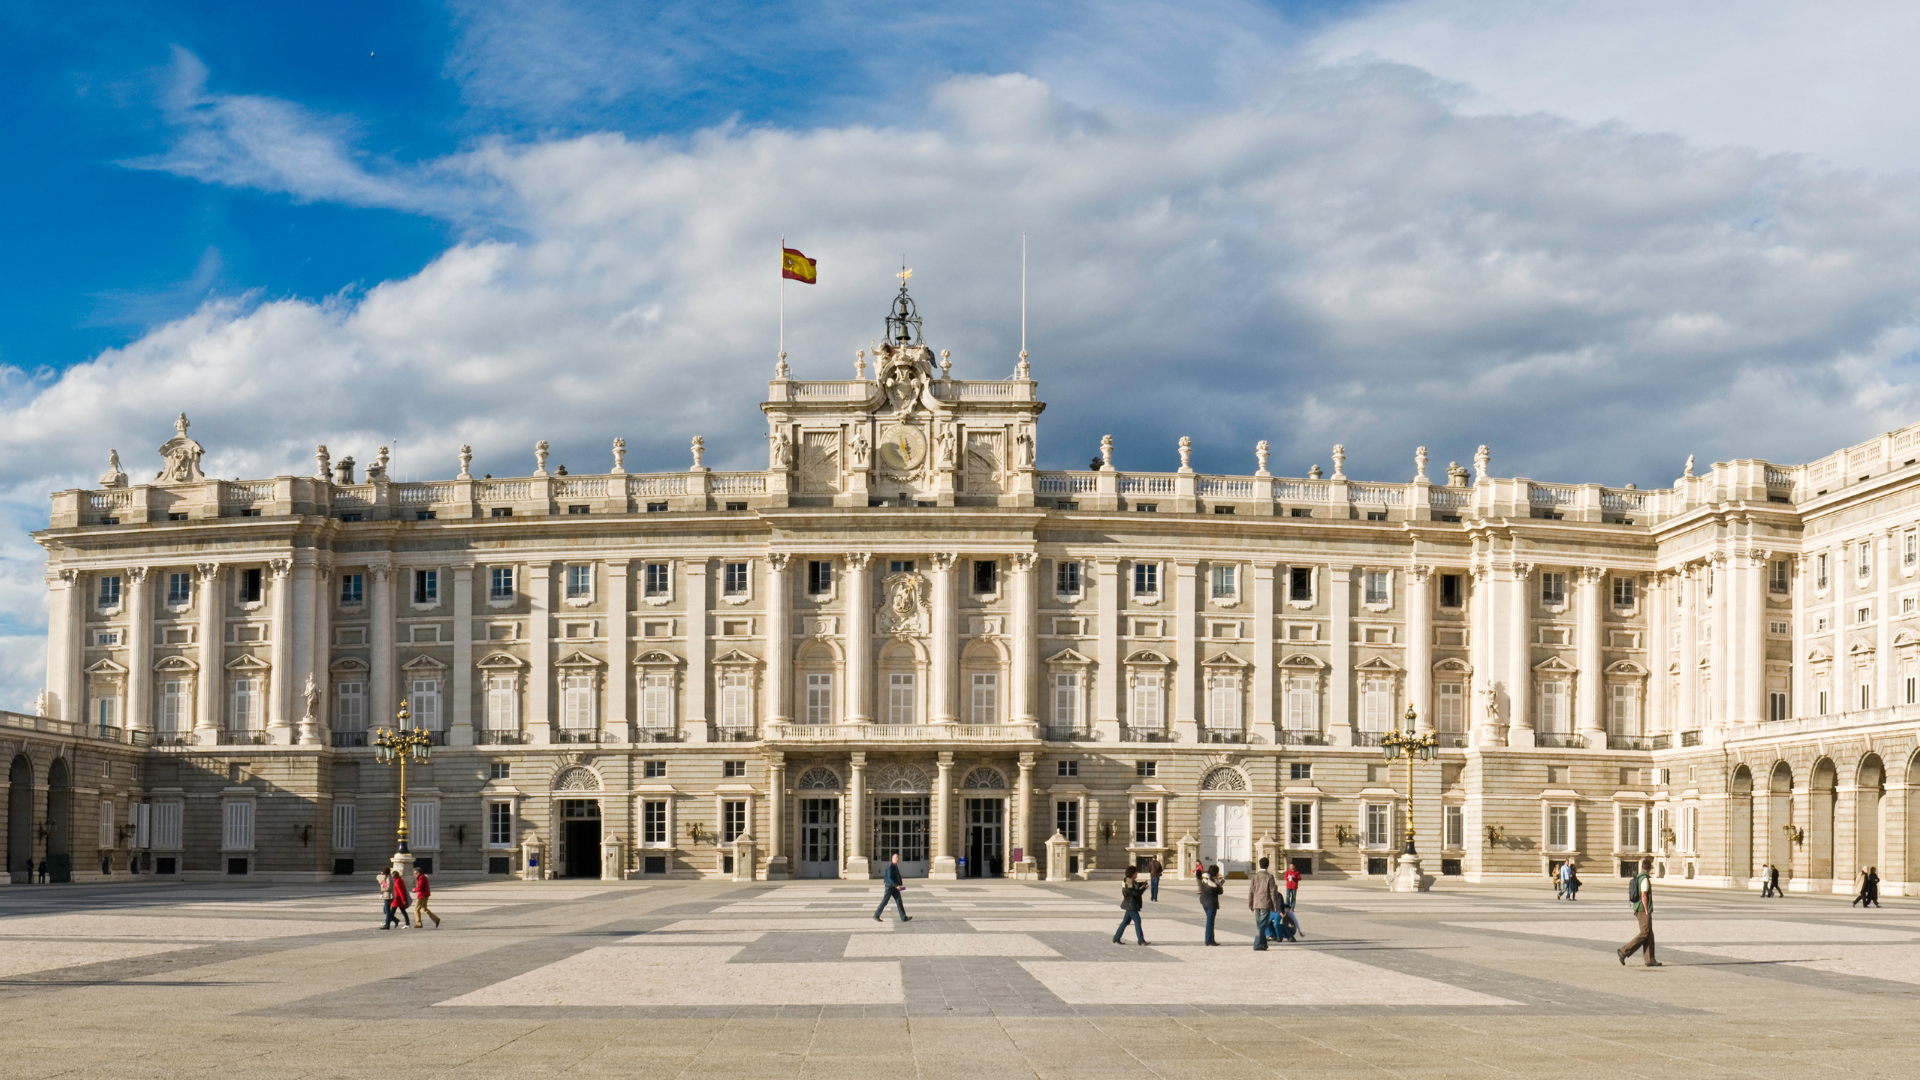 Guided tour with access to the Royal Palace and Cathedral of La Almudena